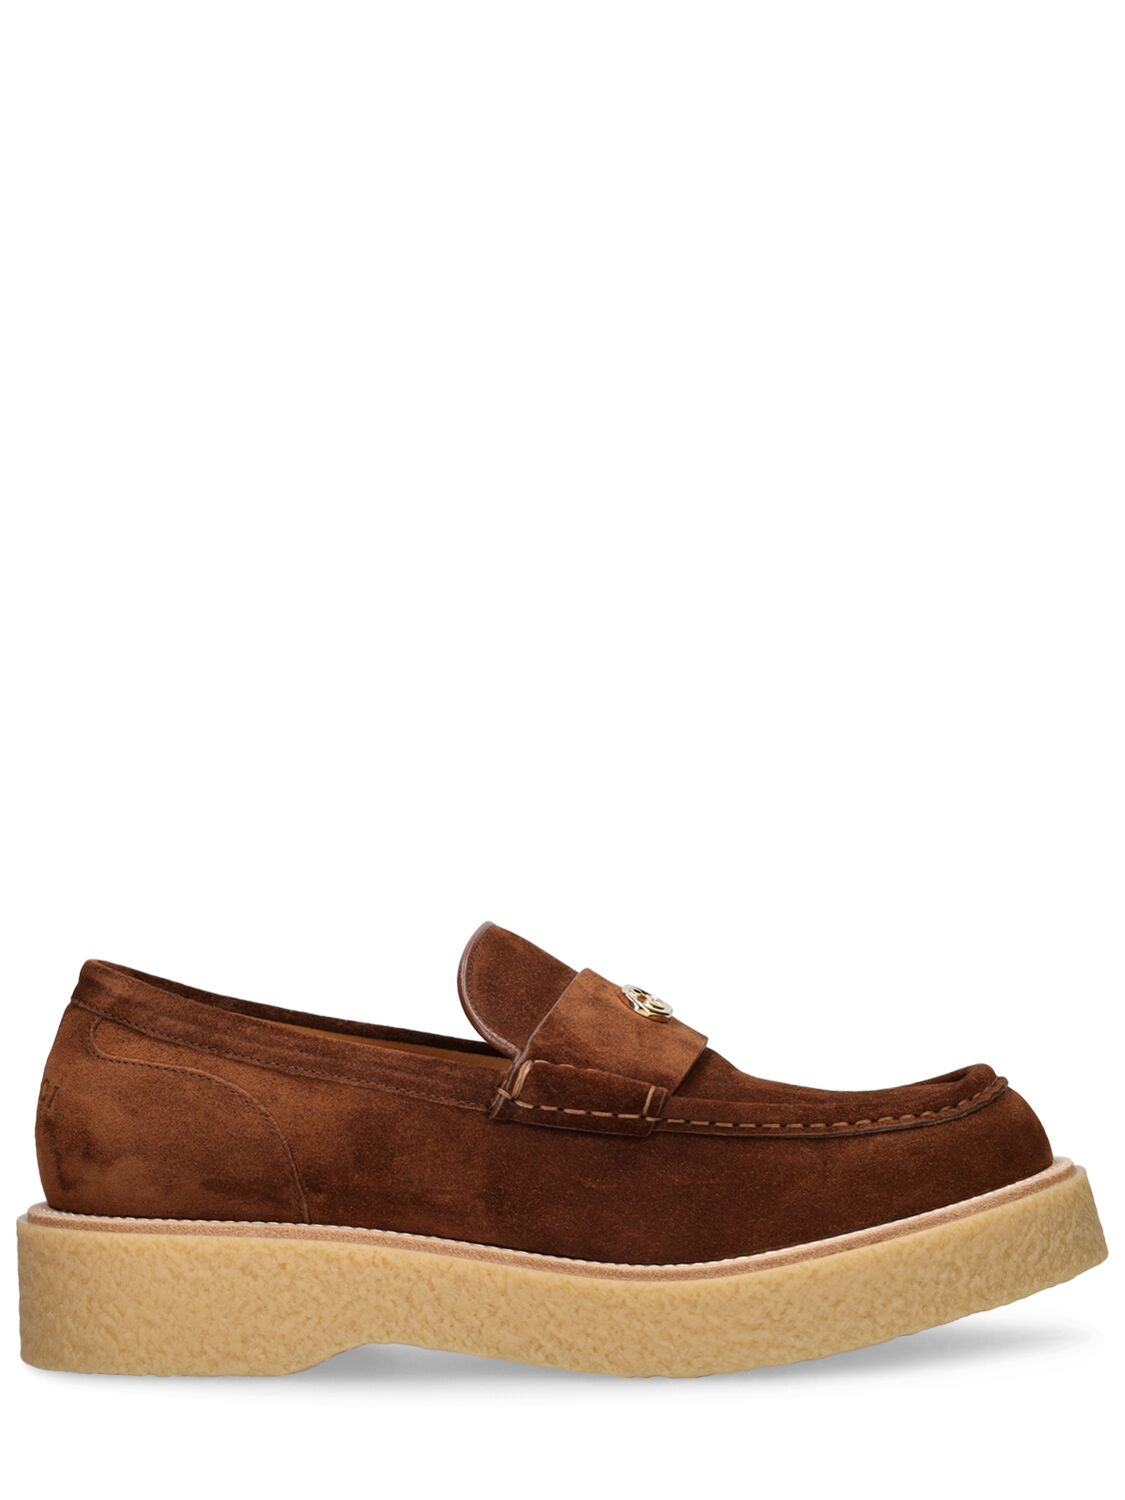 GUCCI MENEN SUEDE LOAFERS